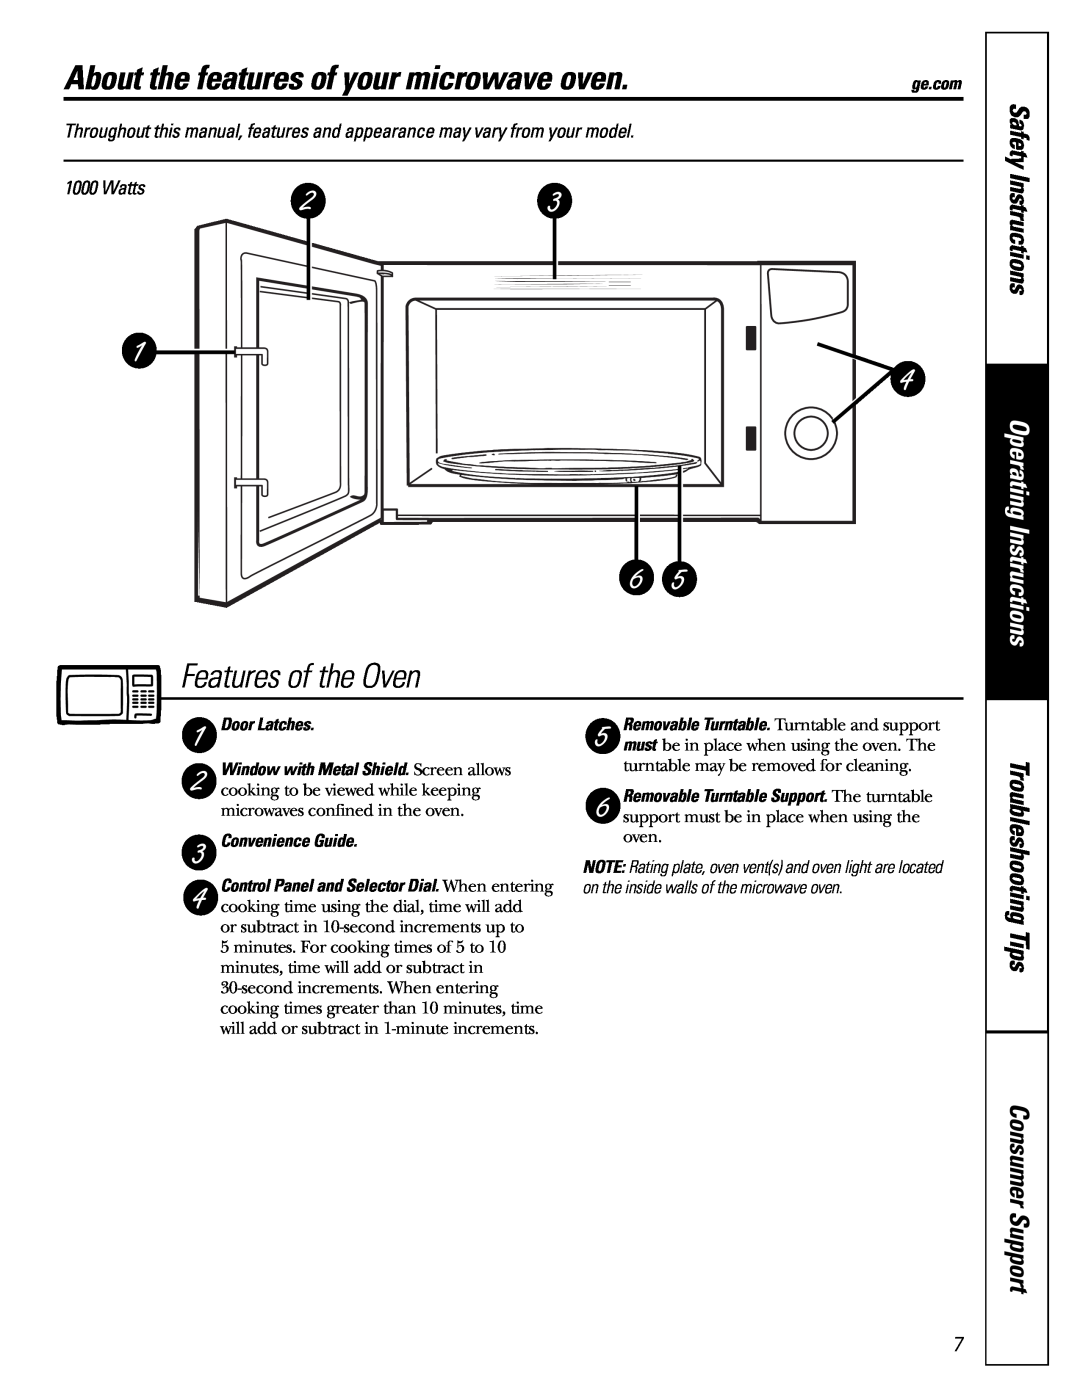 GE JES1344 About the features of your microwave oven, Features of the Oven, Safety Instructions, Operating Instructions 